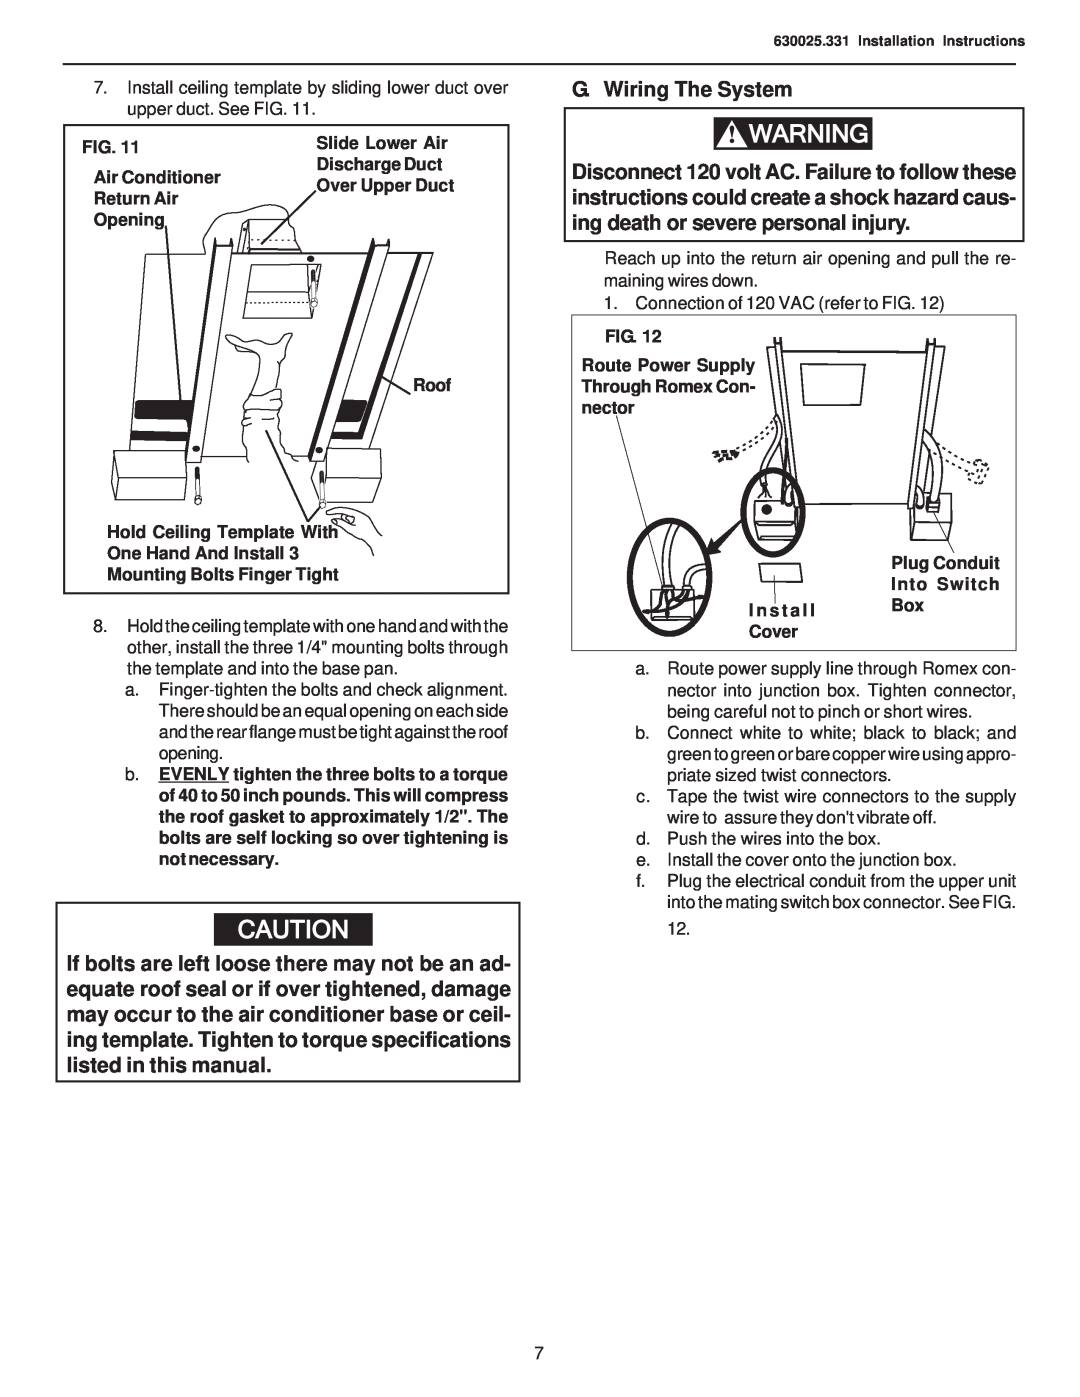 Dometic 630025.331 operating instructions G. Wiring The System 